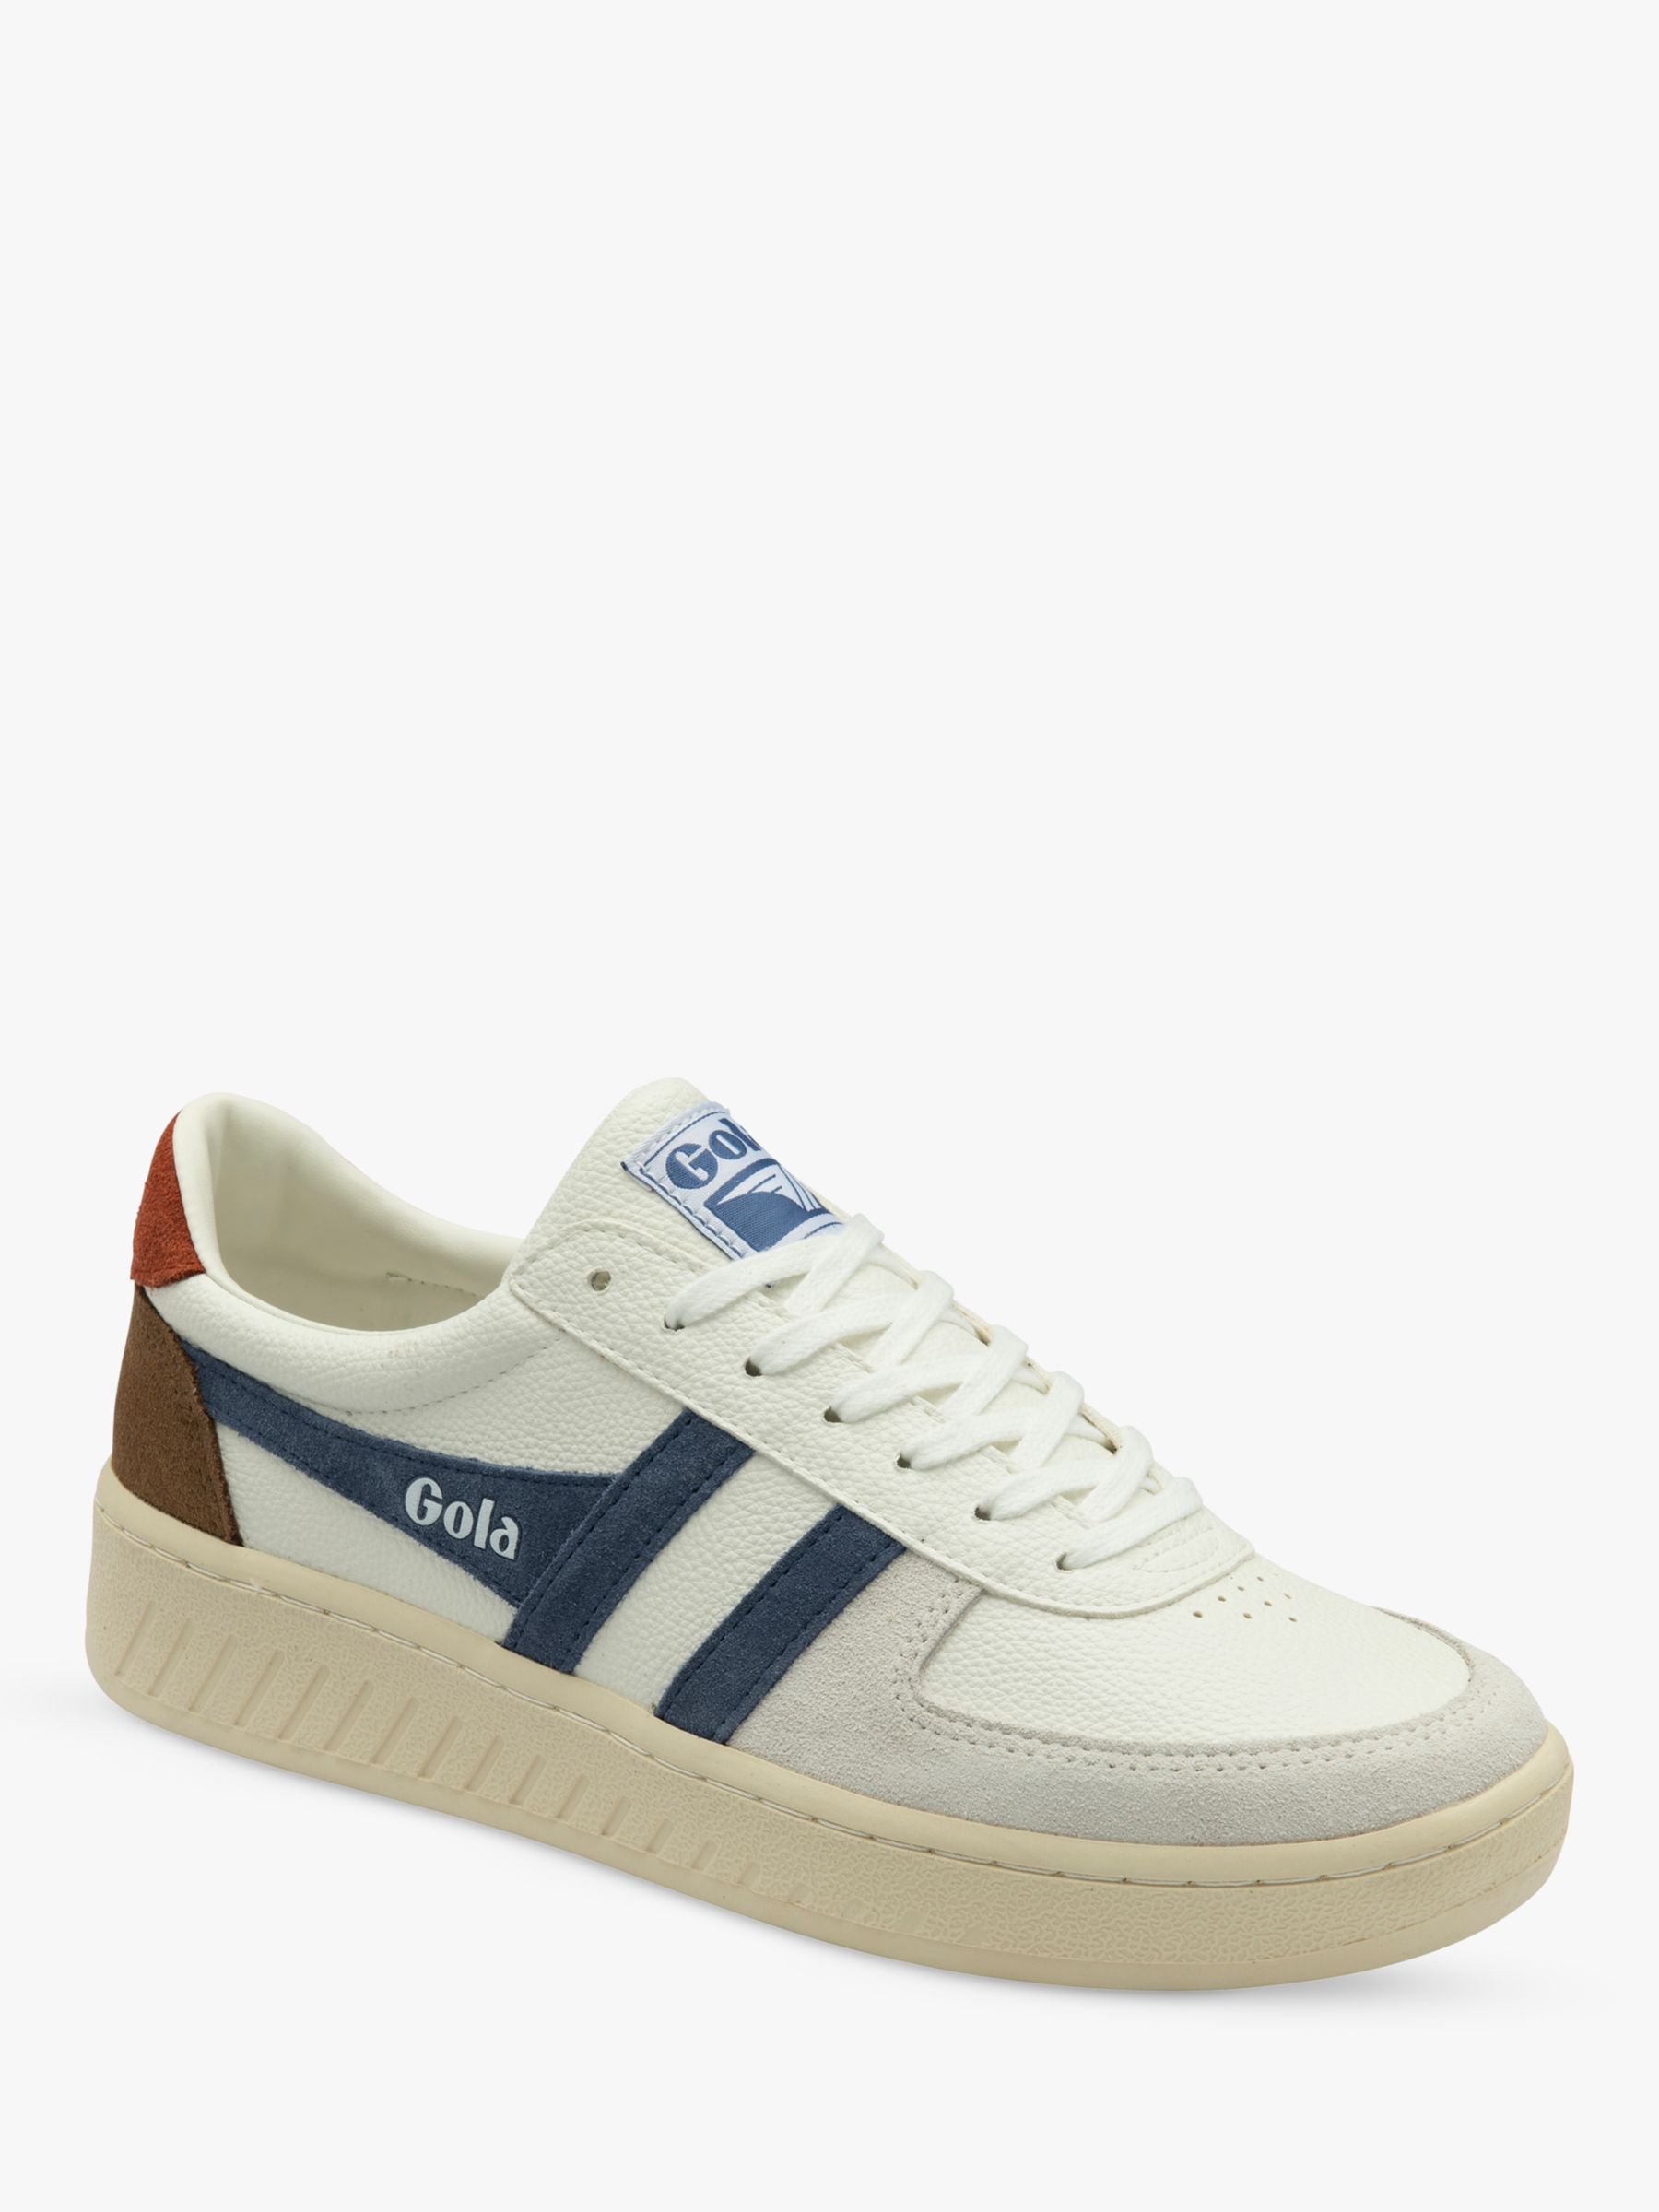 Gola Grandslam Trident Lace Up Trainers, White/Moonlight/Rust at John ...